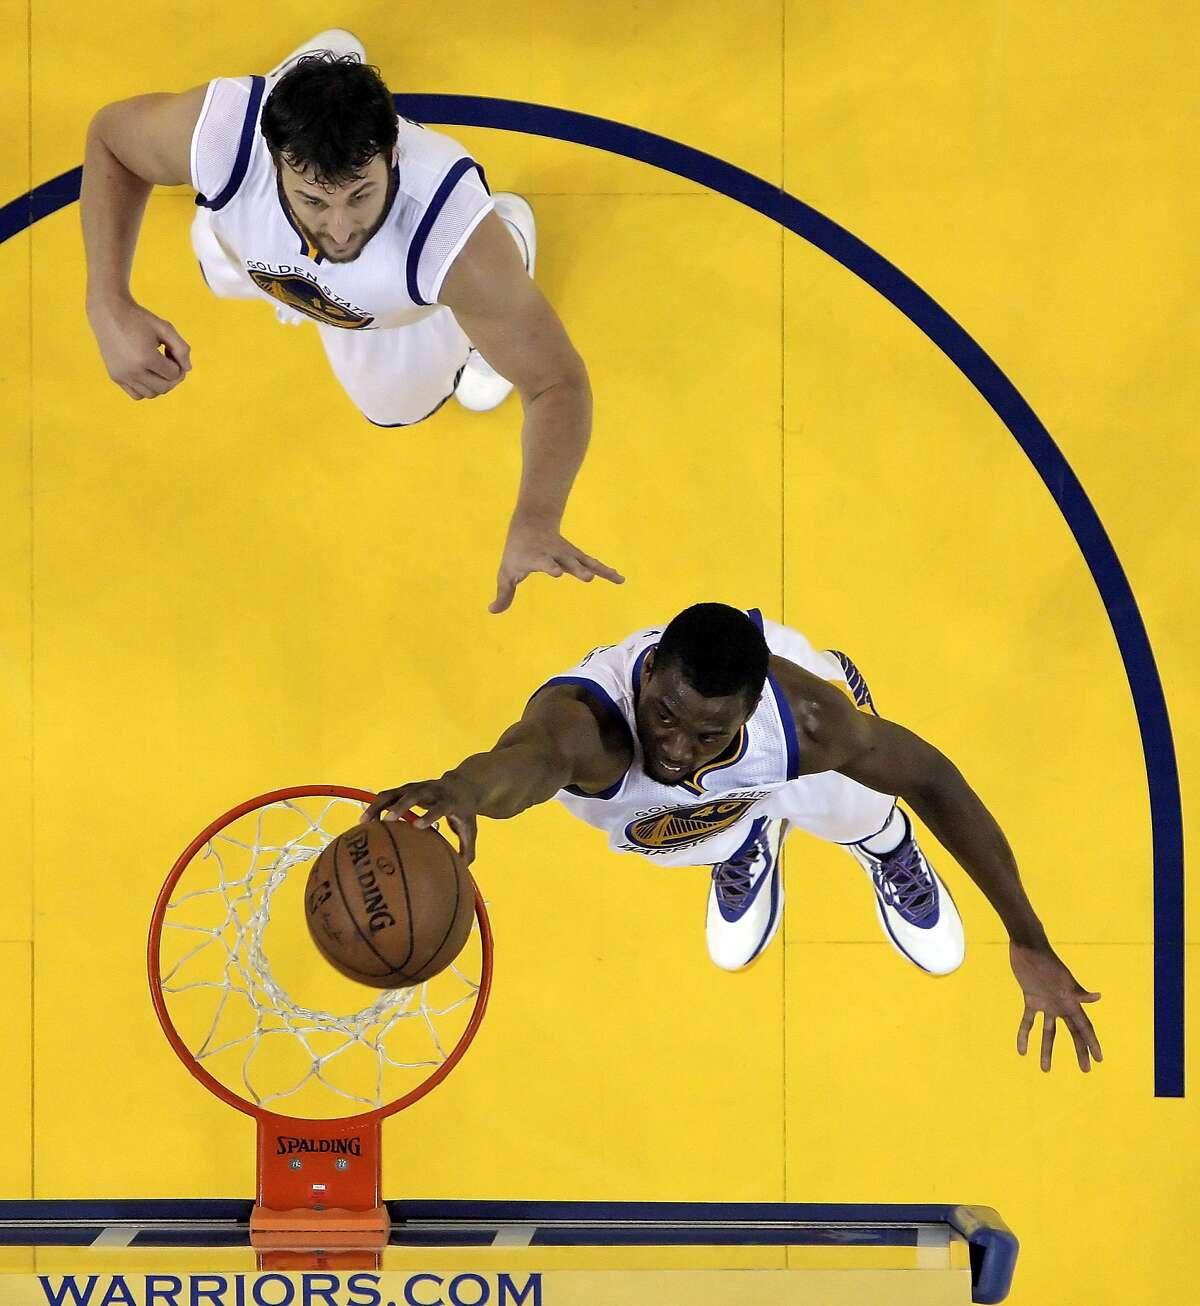 Harrison Barnes (40) dunks in the first half. The Golden State Warriors played the Memphis Grizzlies in Game 5 of the Western Conference Semifinals at Oracle Arena in Oakland, Calif., on Wednesday, May 13, 2015. The Warriors defeated the Grizzlies 98-78.